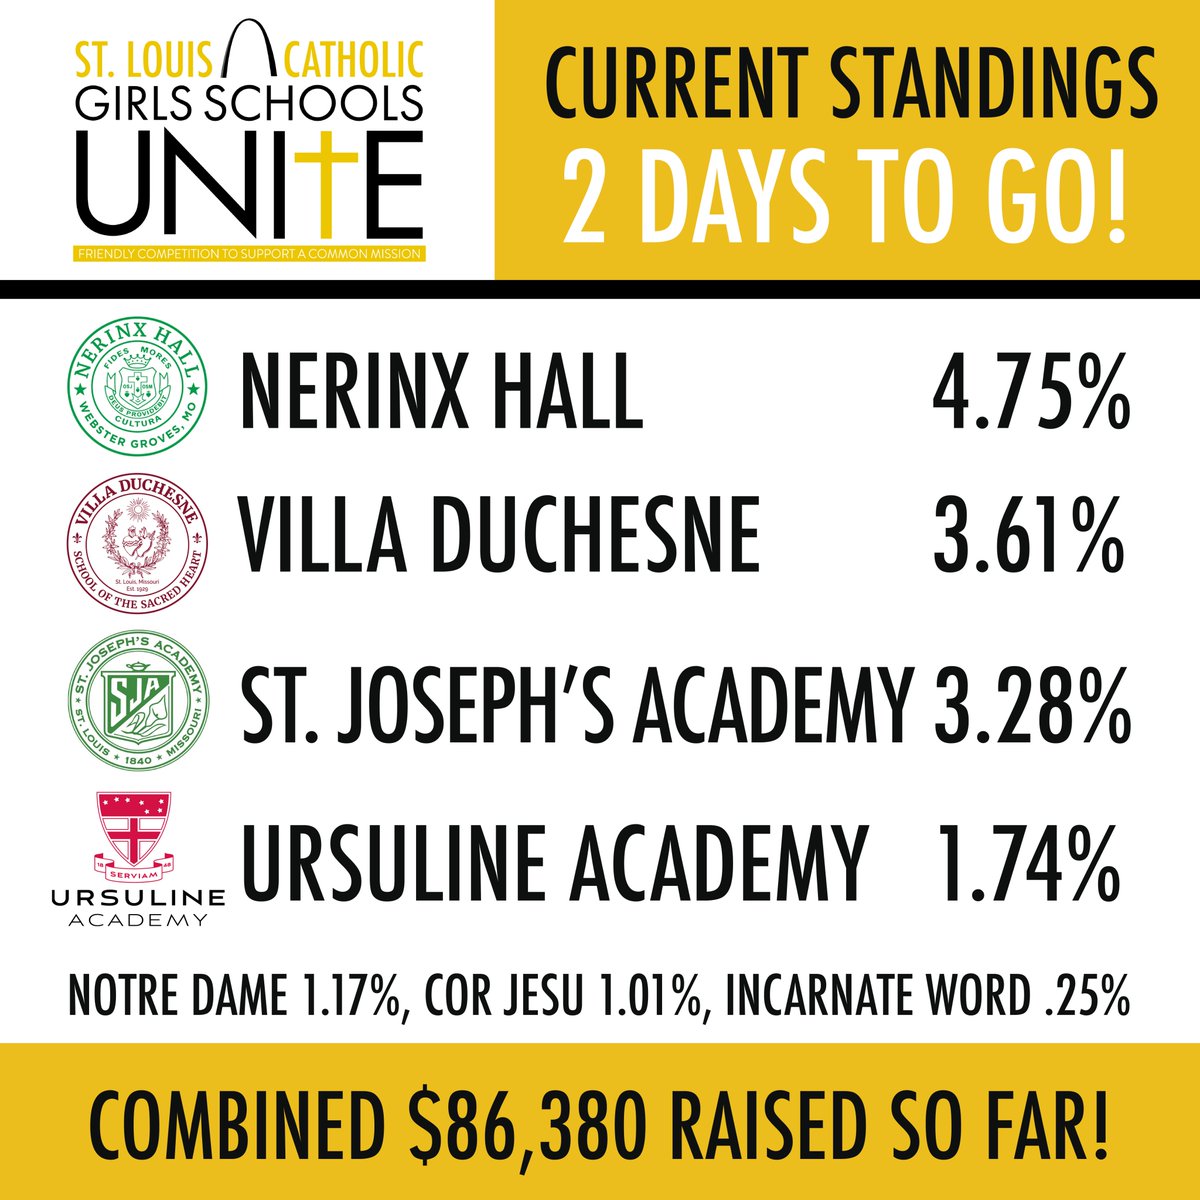 Current standings! Alumnae, don't forget to check with your classmates and remind them about Girls Schools Unite! A 1996 alum says, 'St. Joe gave me the education, confidence, and friendships that have enriched and inspired my life.' What is your reason to give? #NotIButWe #GSU